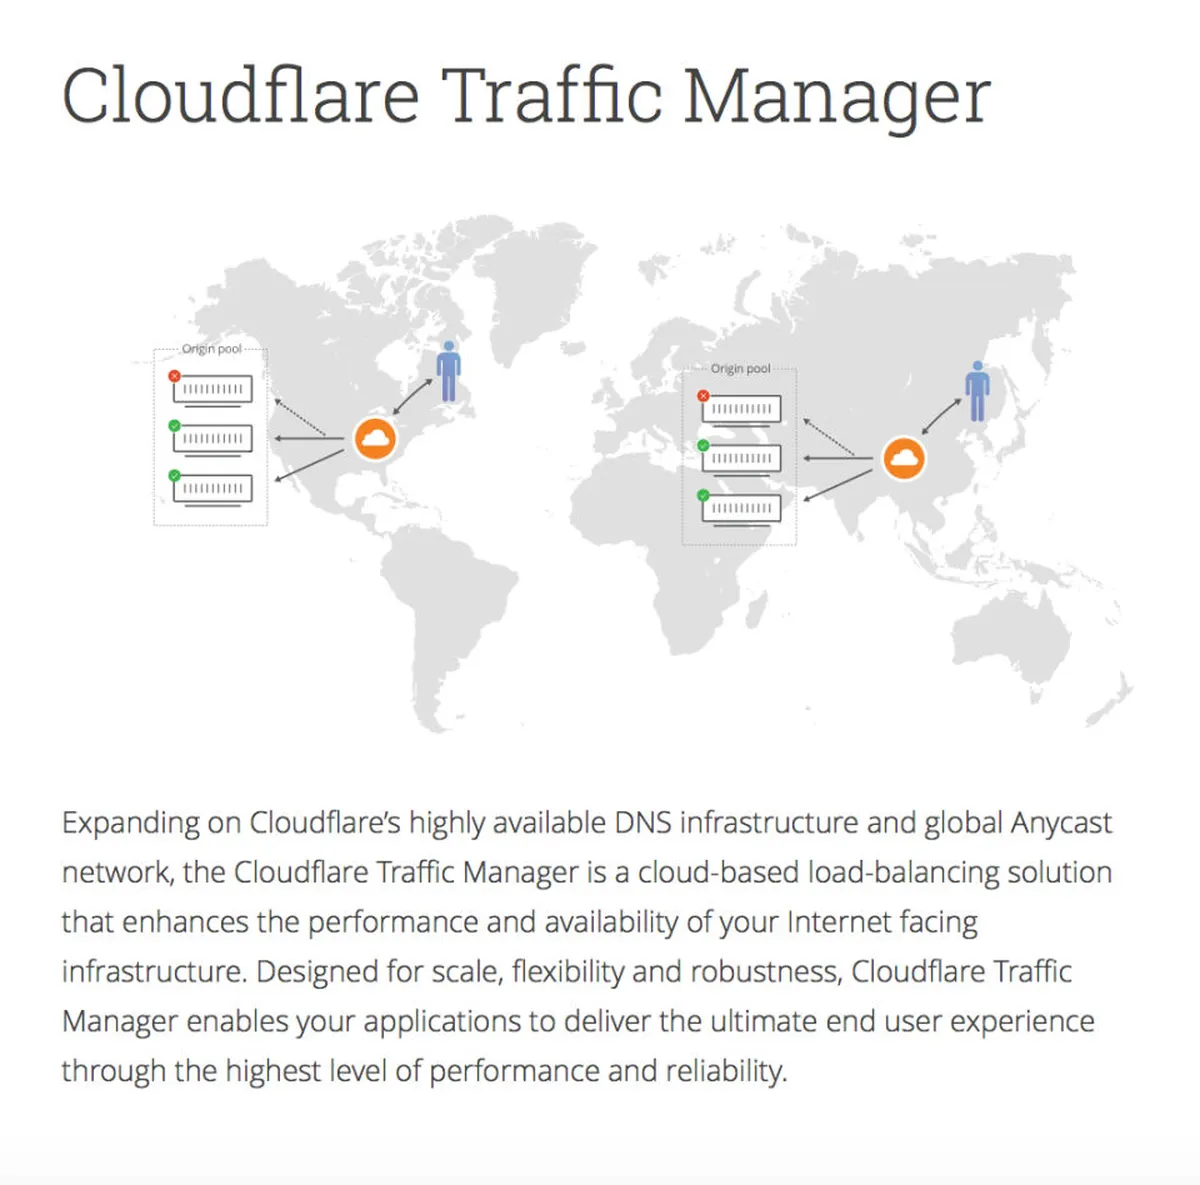 Cloudflare Features